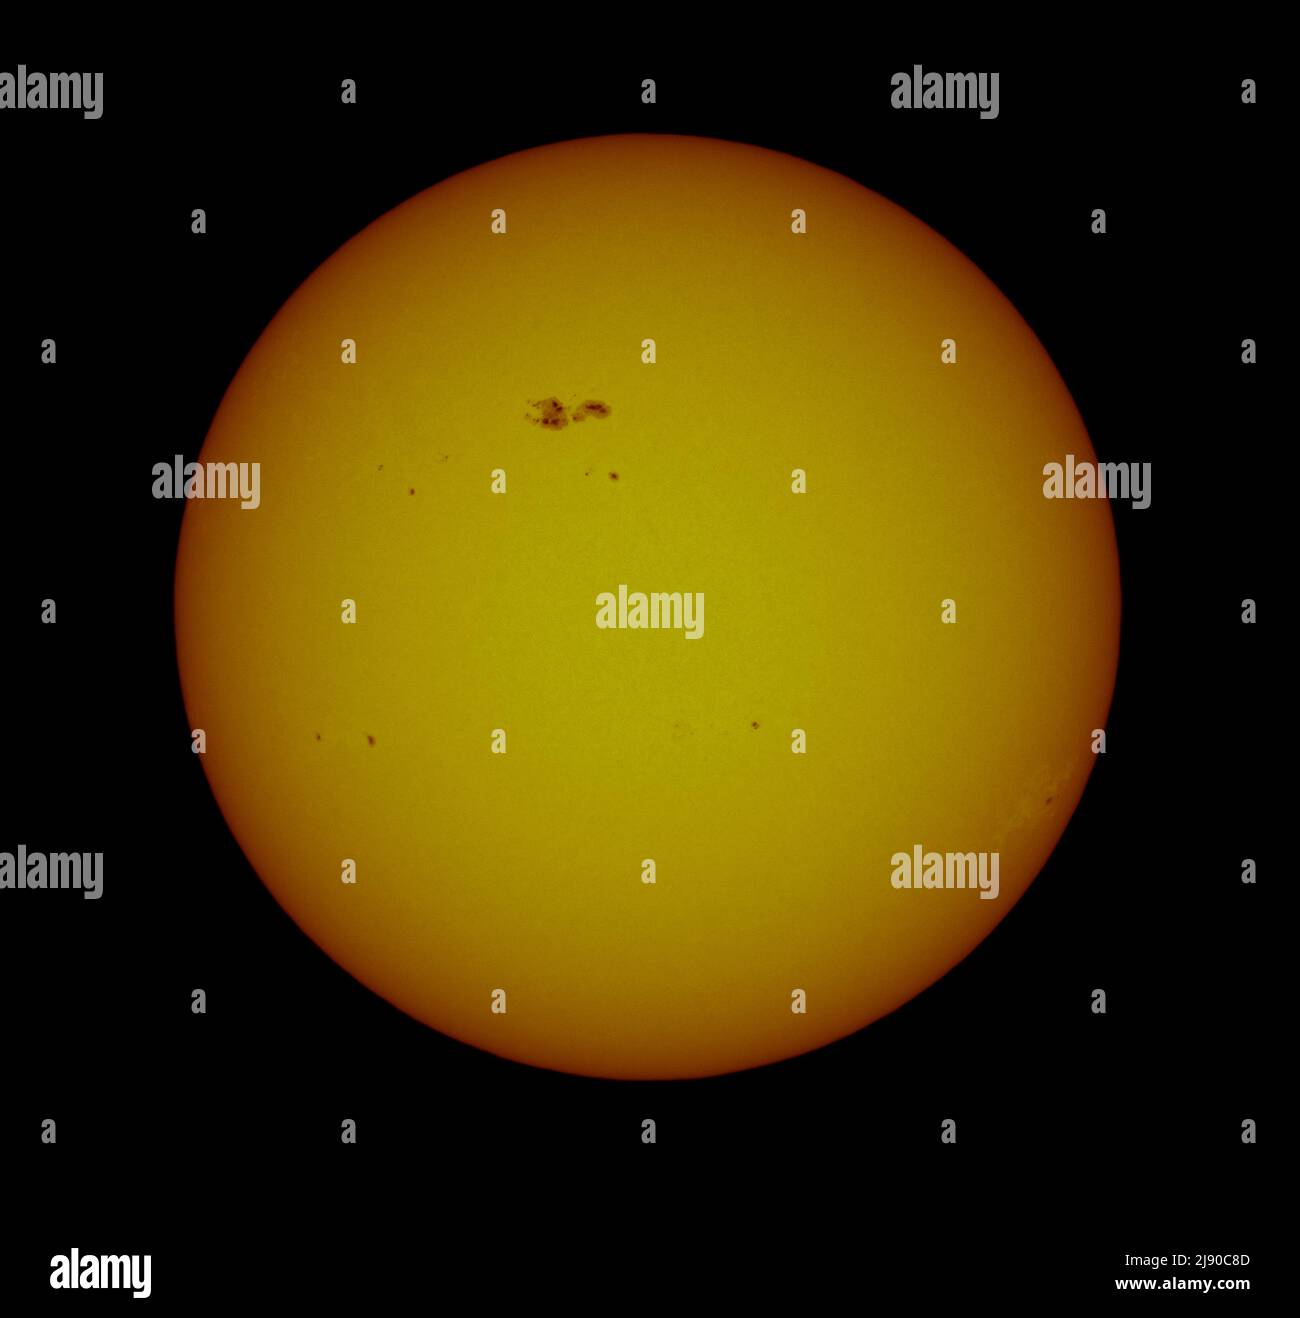 London, UK. 19 May 2022. Groups of sunspots scattered around the surface of the sun with the large group, AR3014 (top left), facing towards Earth and having the potential to unleash solar M class flares. Credit: Malcolm Park/Alamy Live News Stock Photo